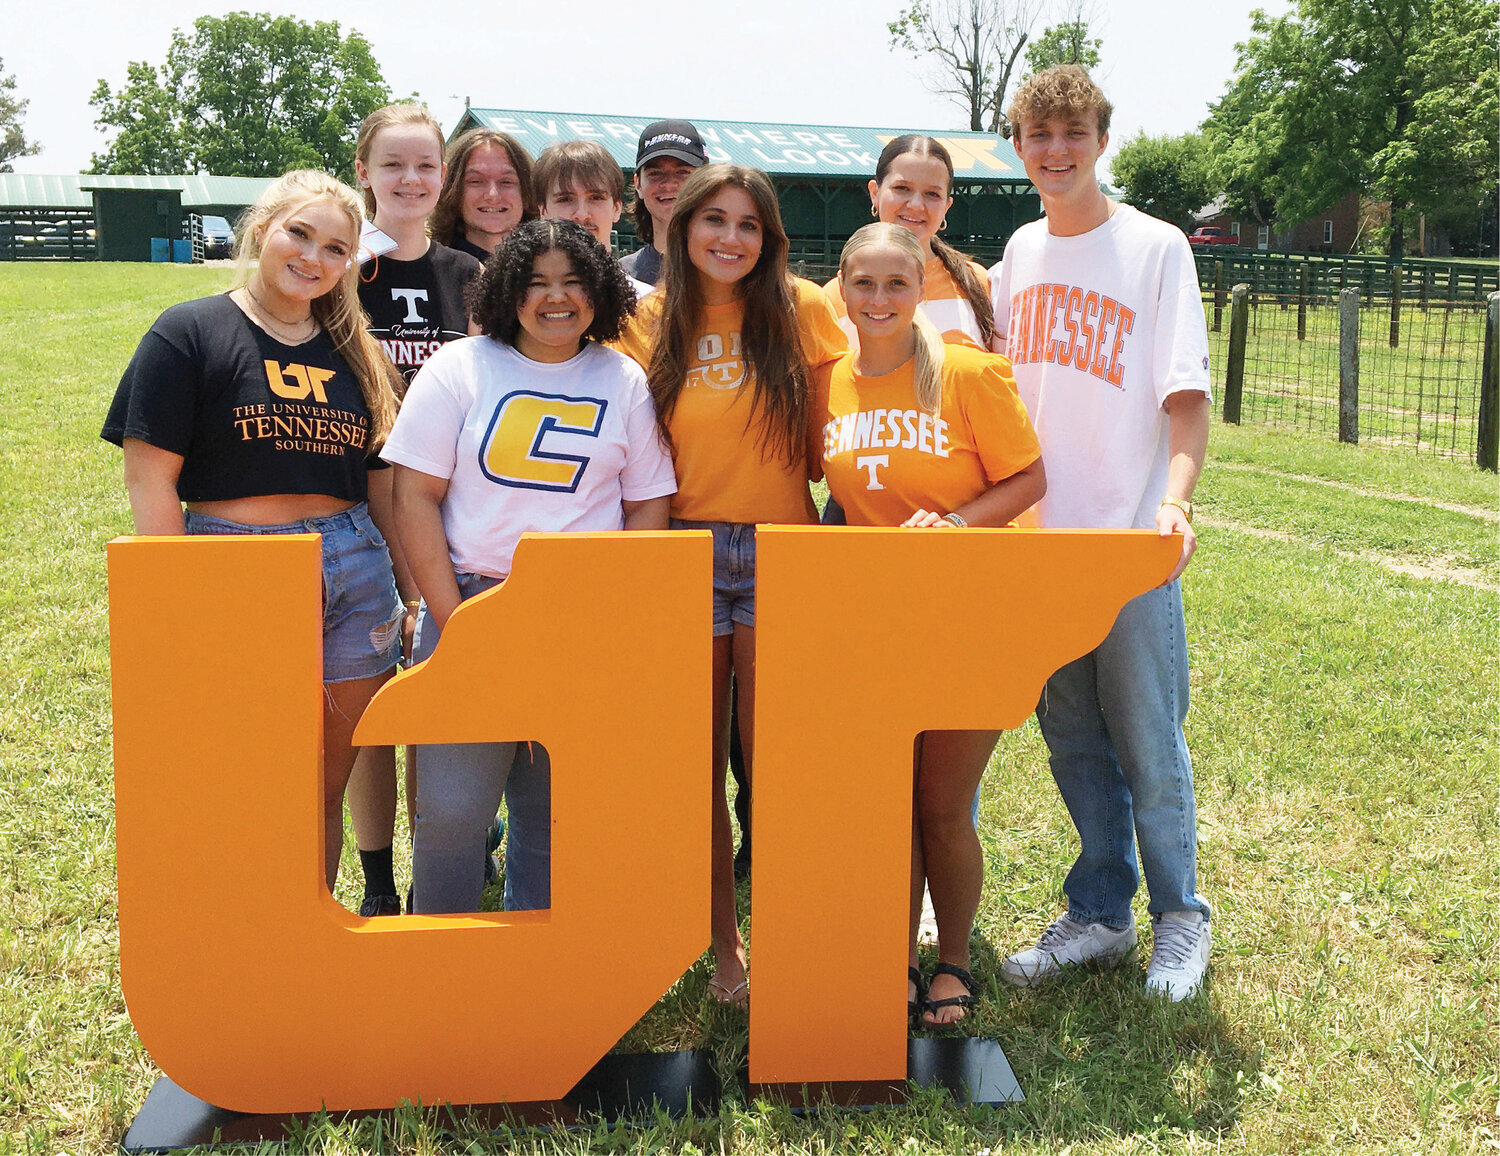 White County High School’s graduating seniors who will be attending the University of Tennessee this fall were introduced at the Johnson Farm mural dedication. Abigail Guy and Breadon Bechtel will attend University of Tennessee Southern, in Pulaski; Clark Langley, T’Mia Ford, and Zakkary Sherman will be attending University of Tennessee Chattanooga; and Annika Amaral, Abbey Moore, Nia Powers, Josiah Rushing, and Madalyn Scott will attend University of Tennessee Knoxville. (Photo by Kim Swindell Wood)